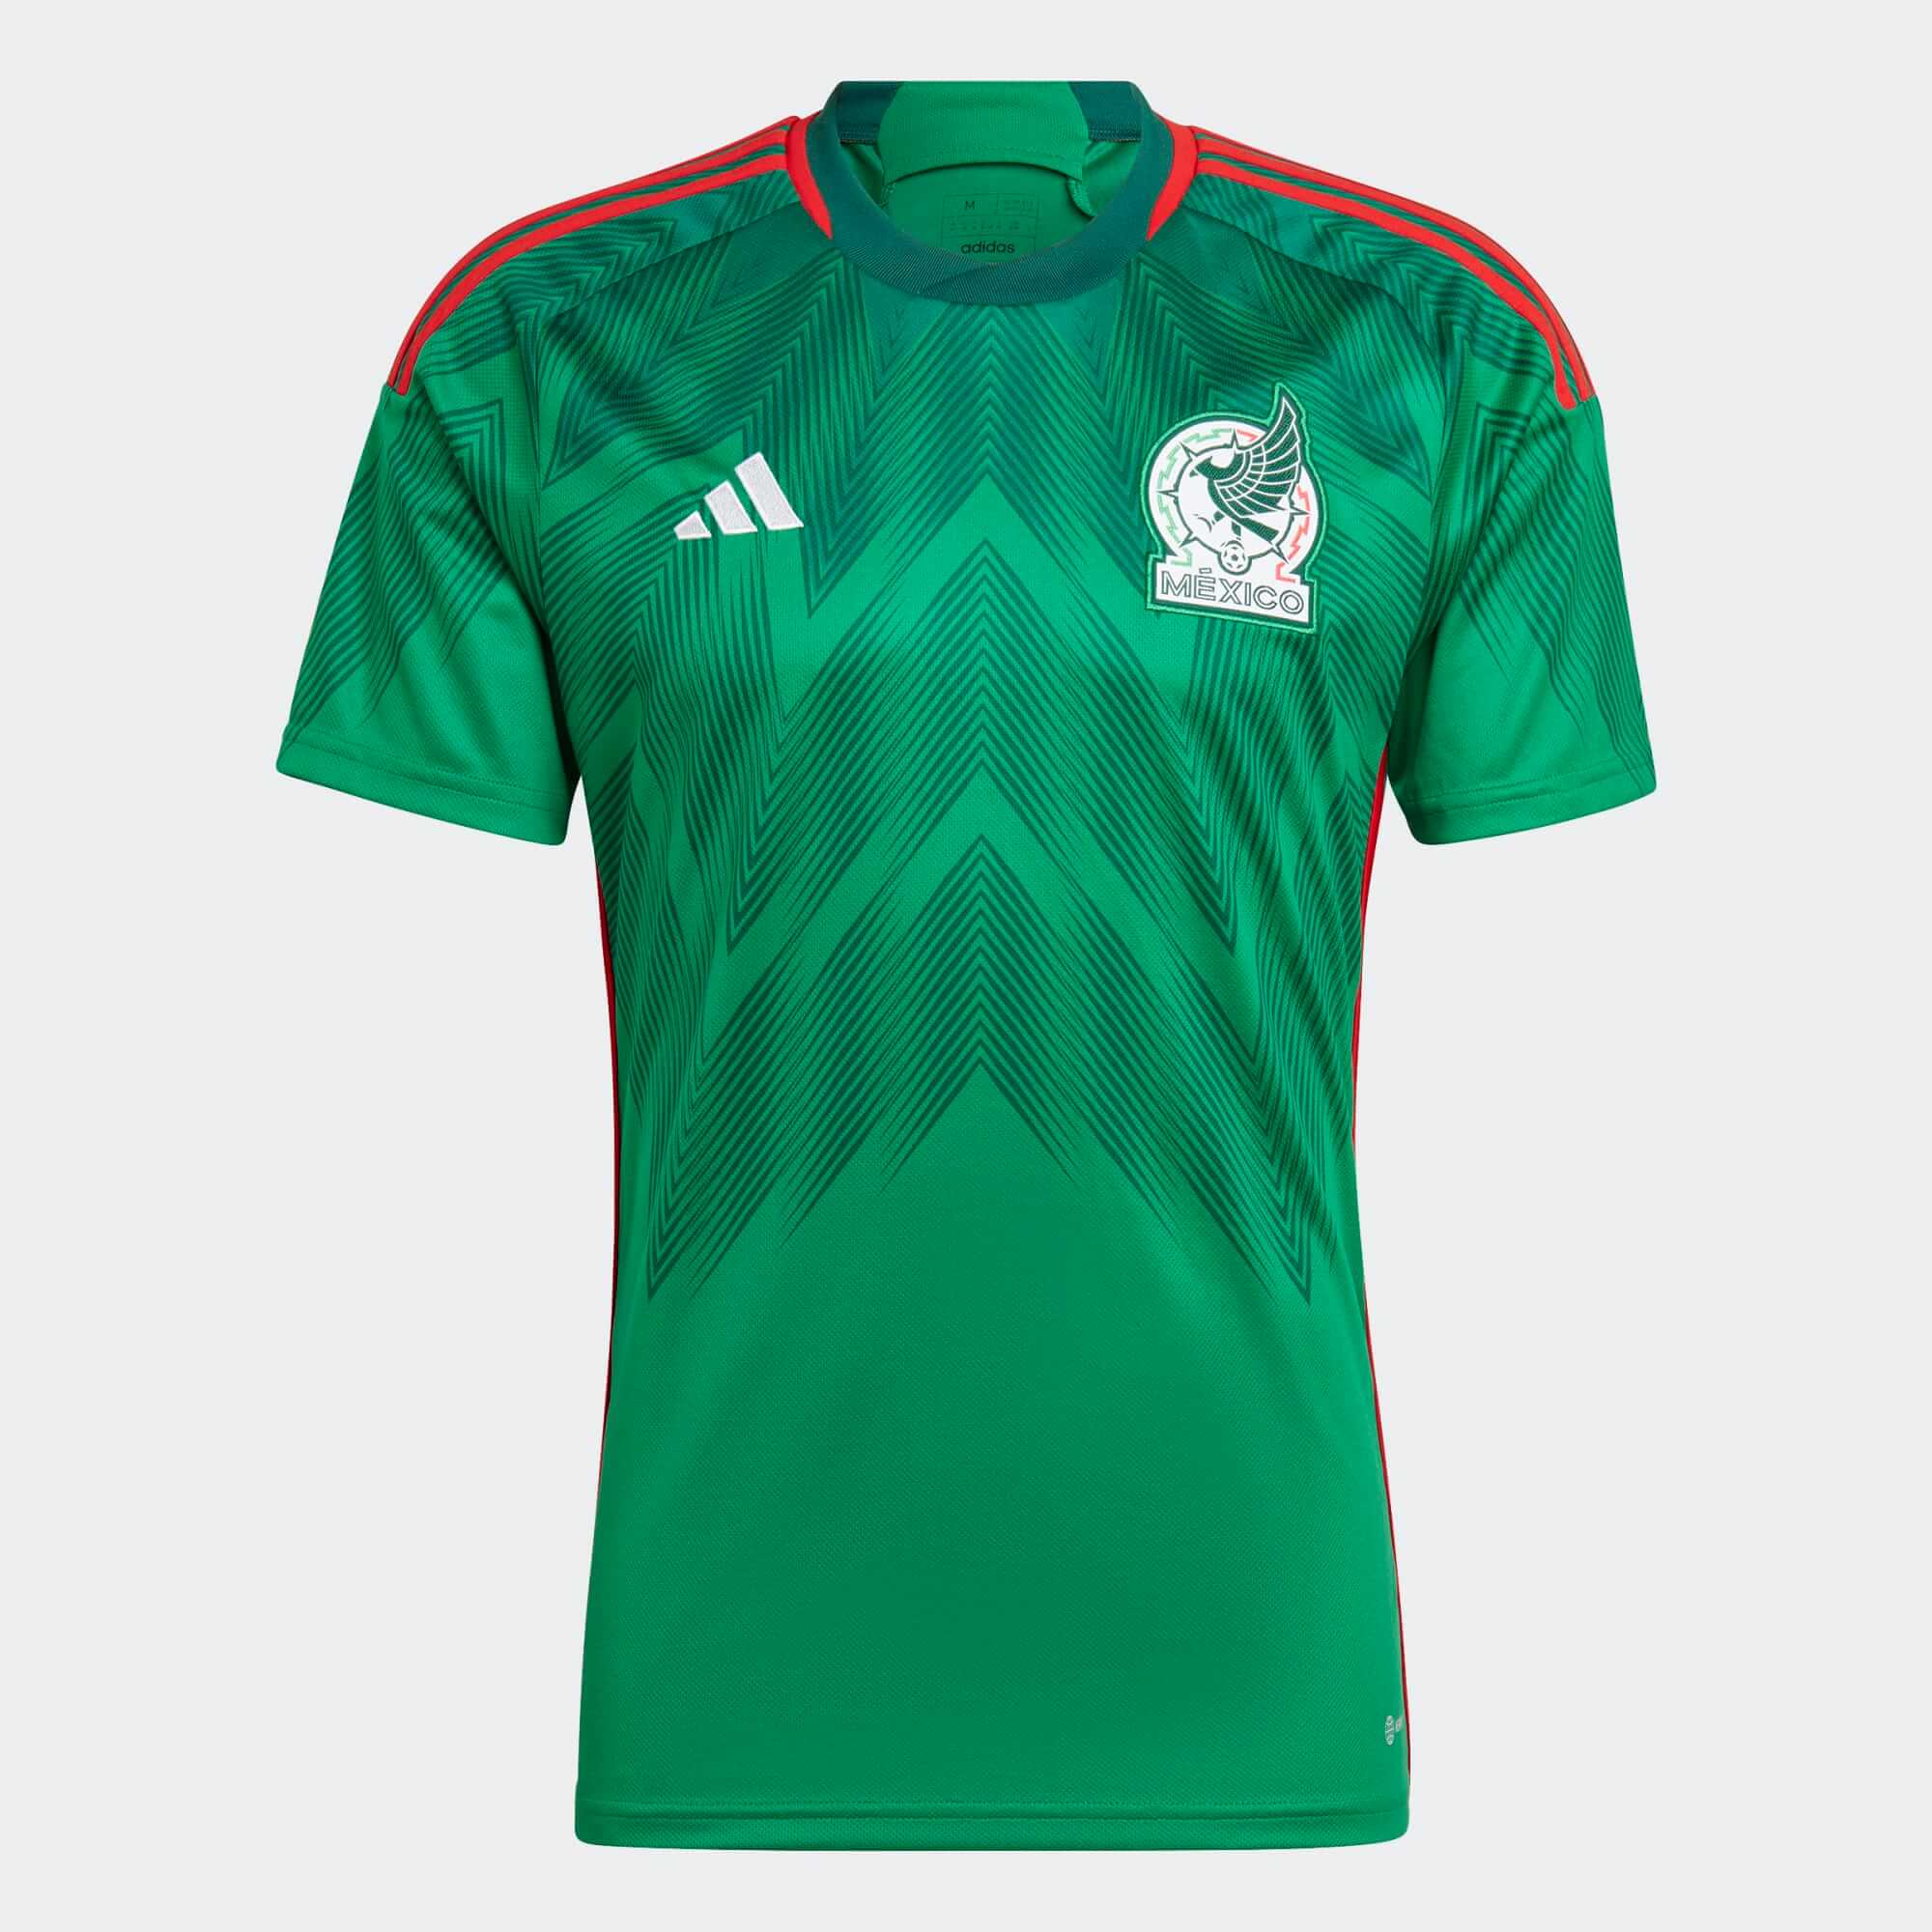 2022-23 Dominica Home Shirt - NEW